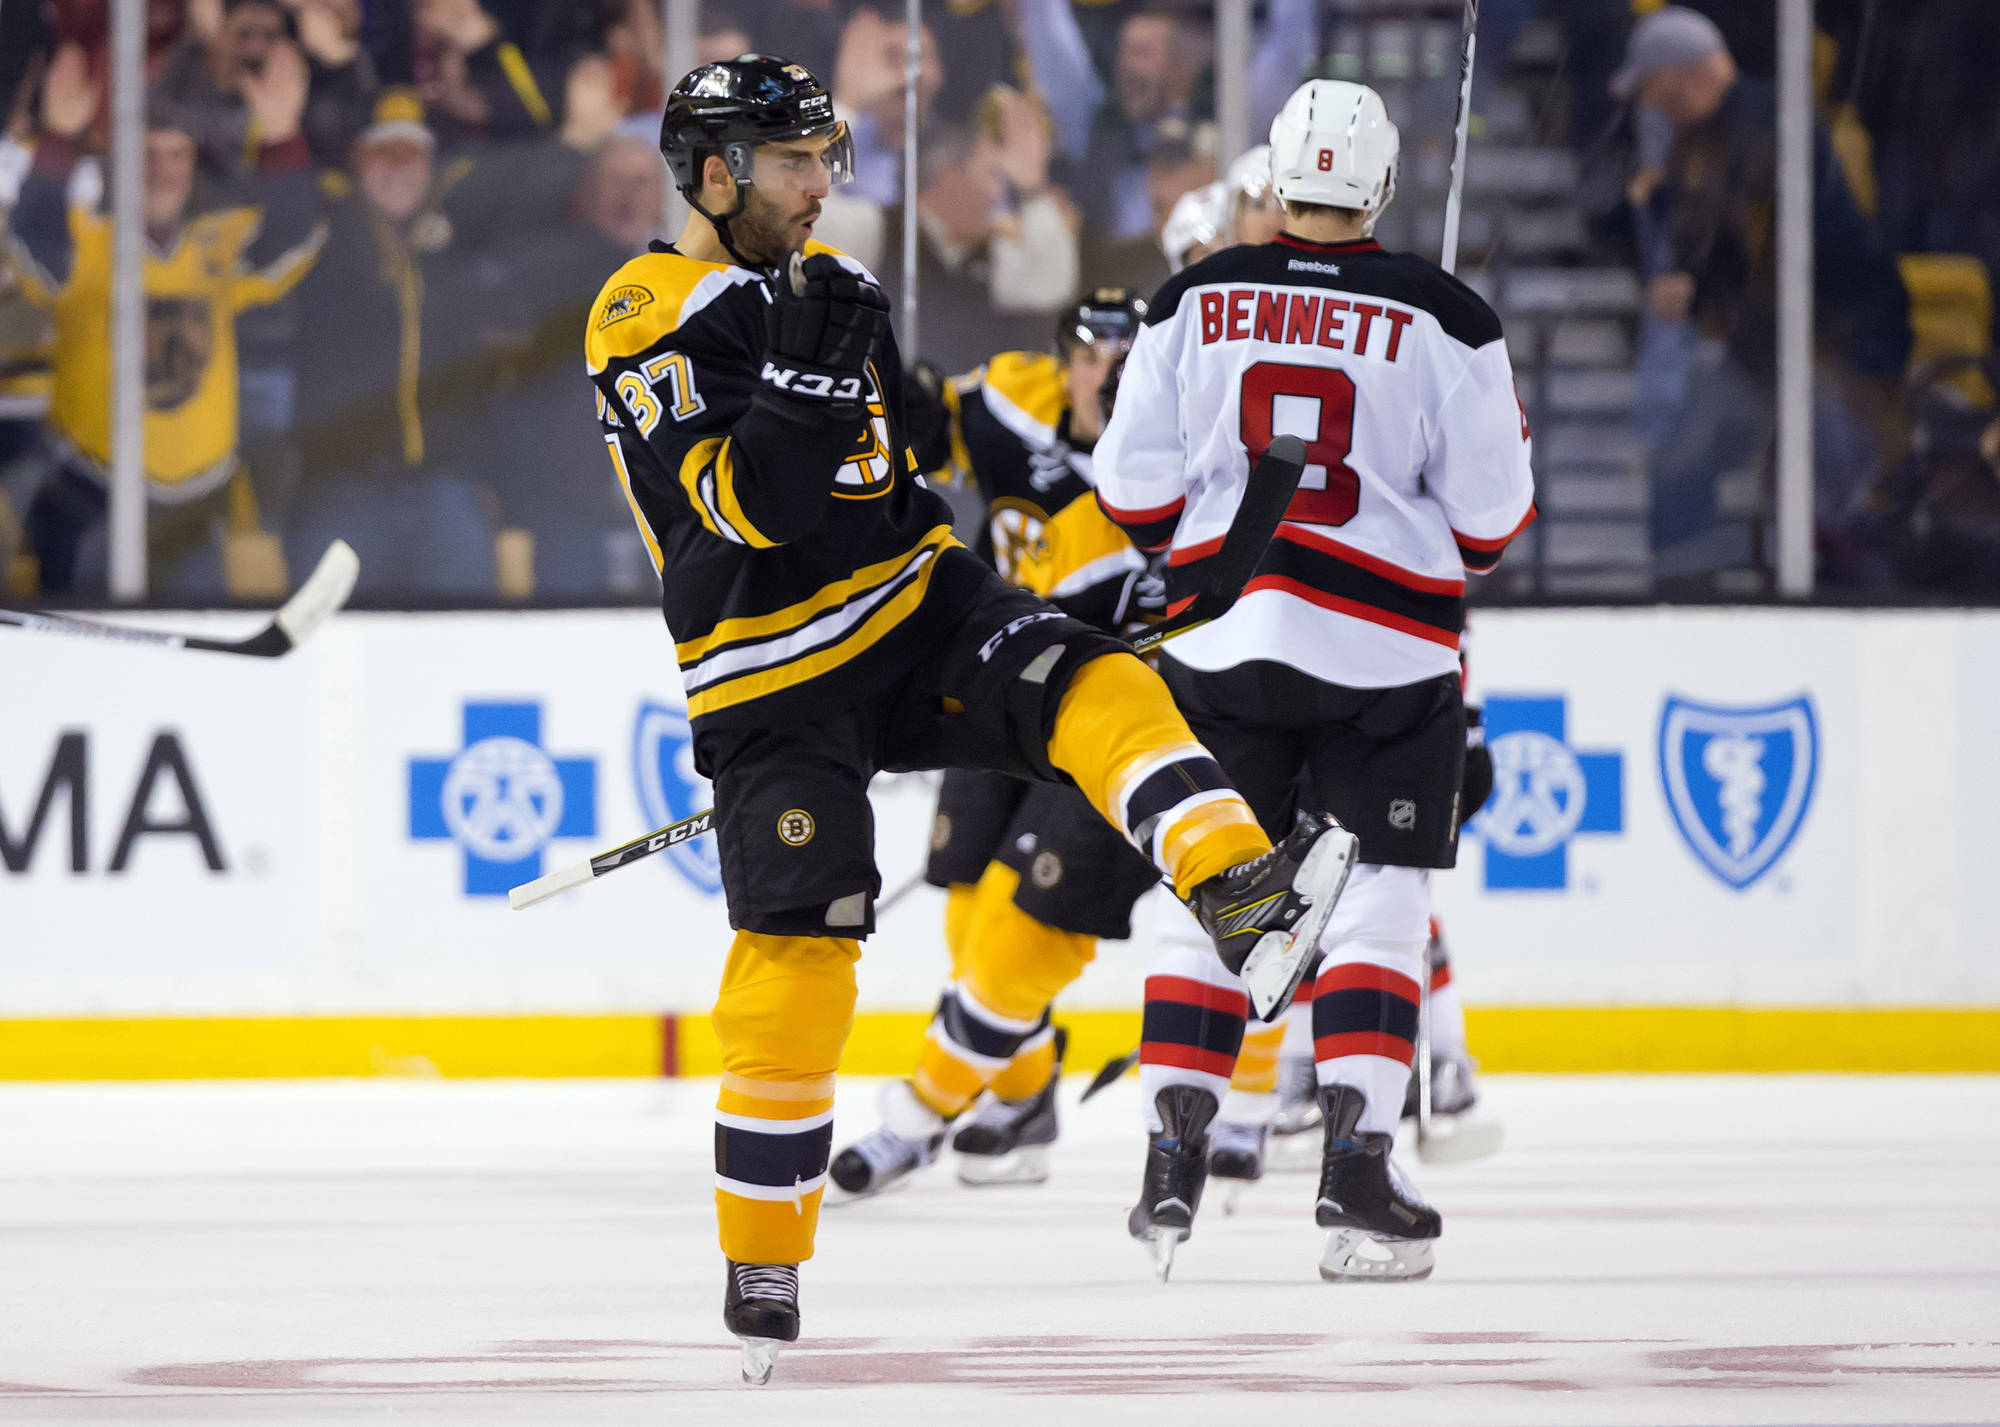 Bergeron and Rask Lead Bruins Over Devils